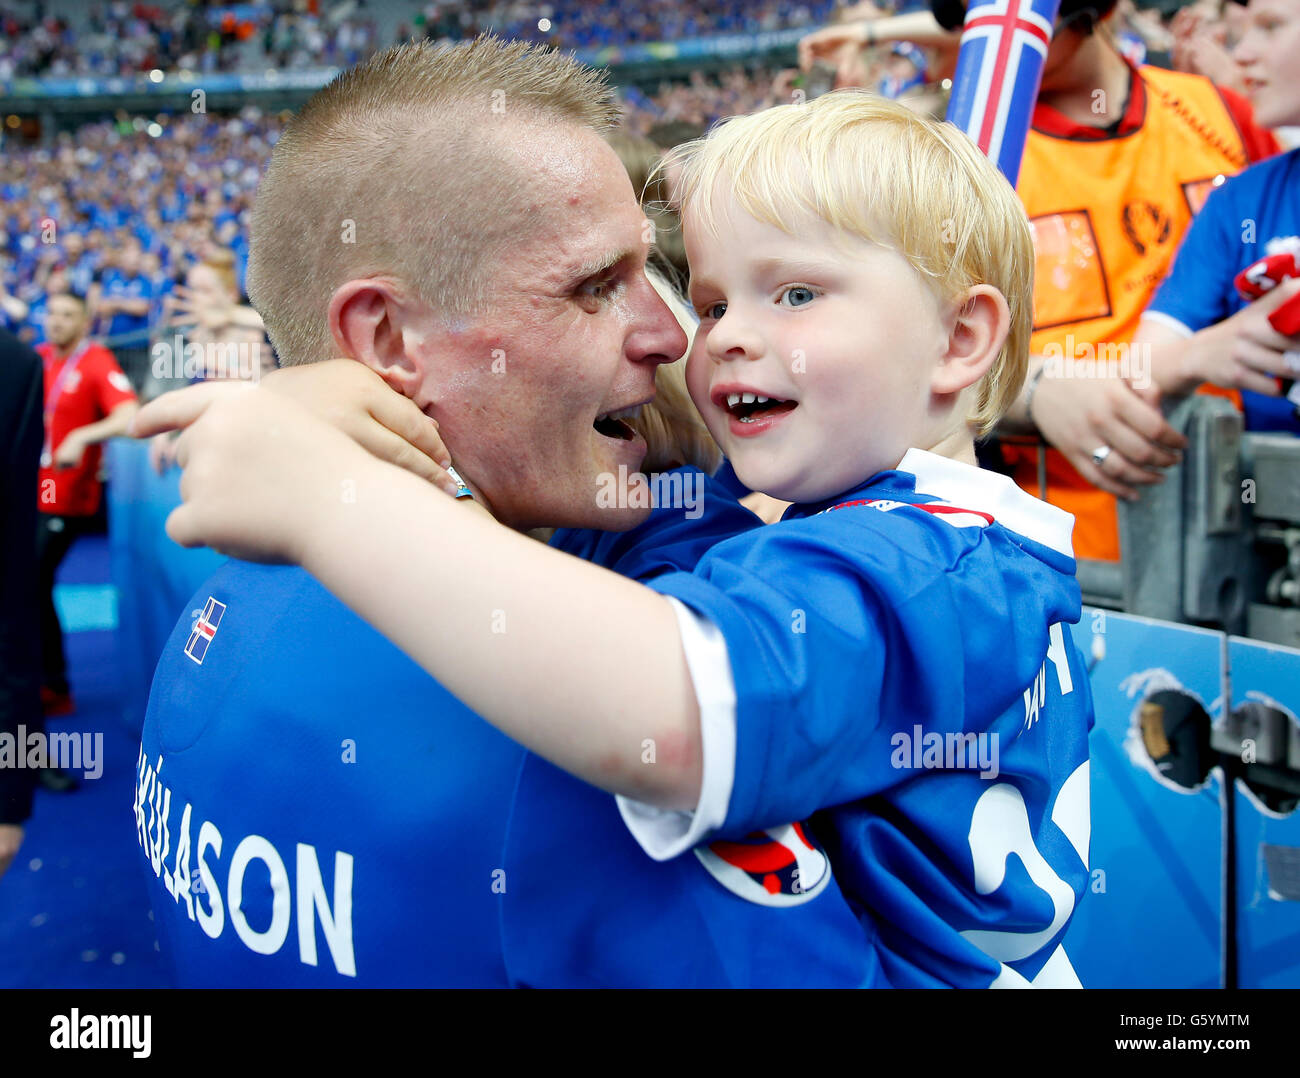 Iceland's Ari Freyr Skulason celebrates qualifying for the last 16 round with his Son after the Euro 2016, Group F match at the Stade de France, Paris. Stock Photo